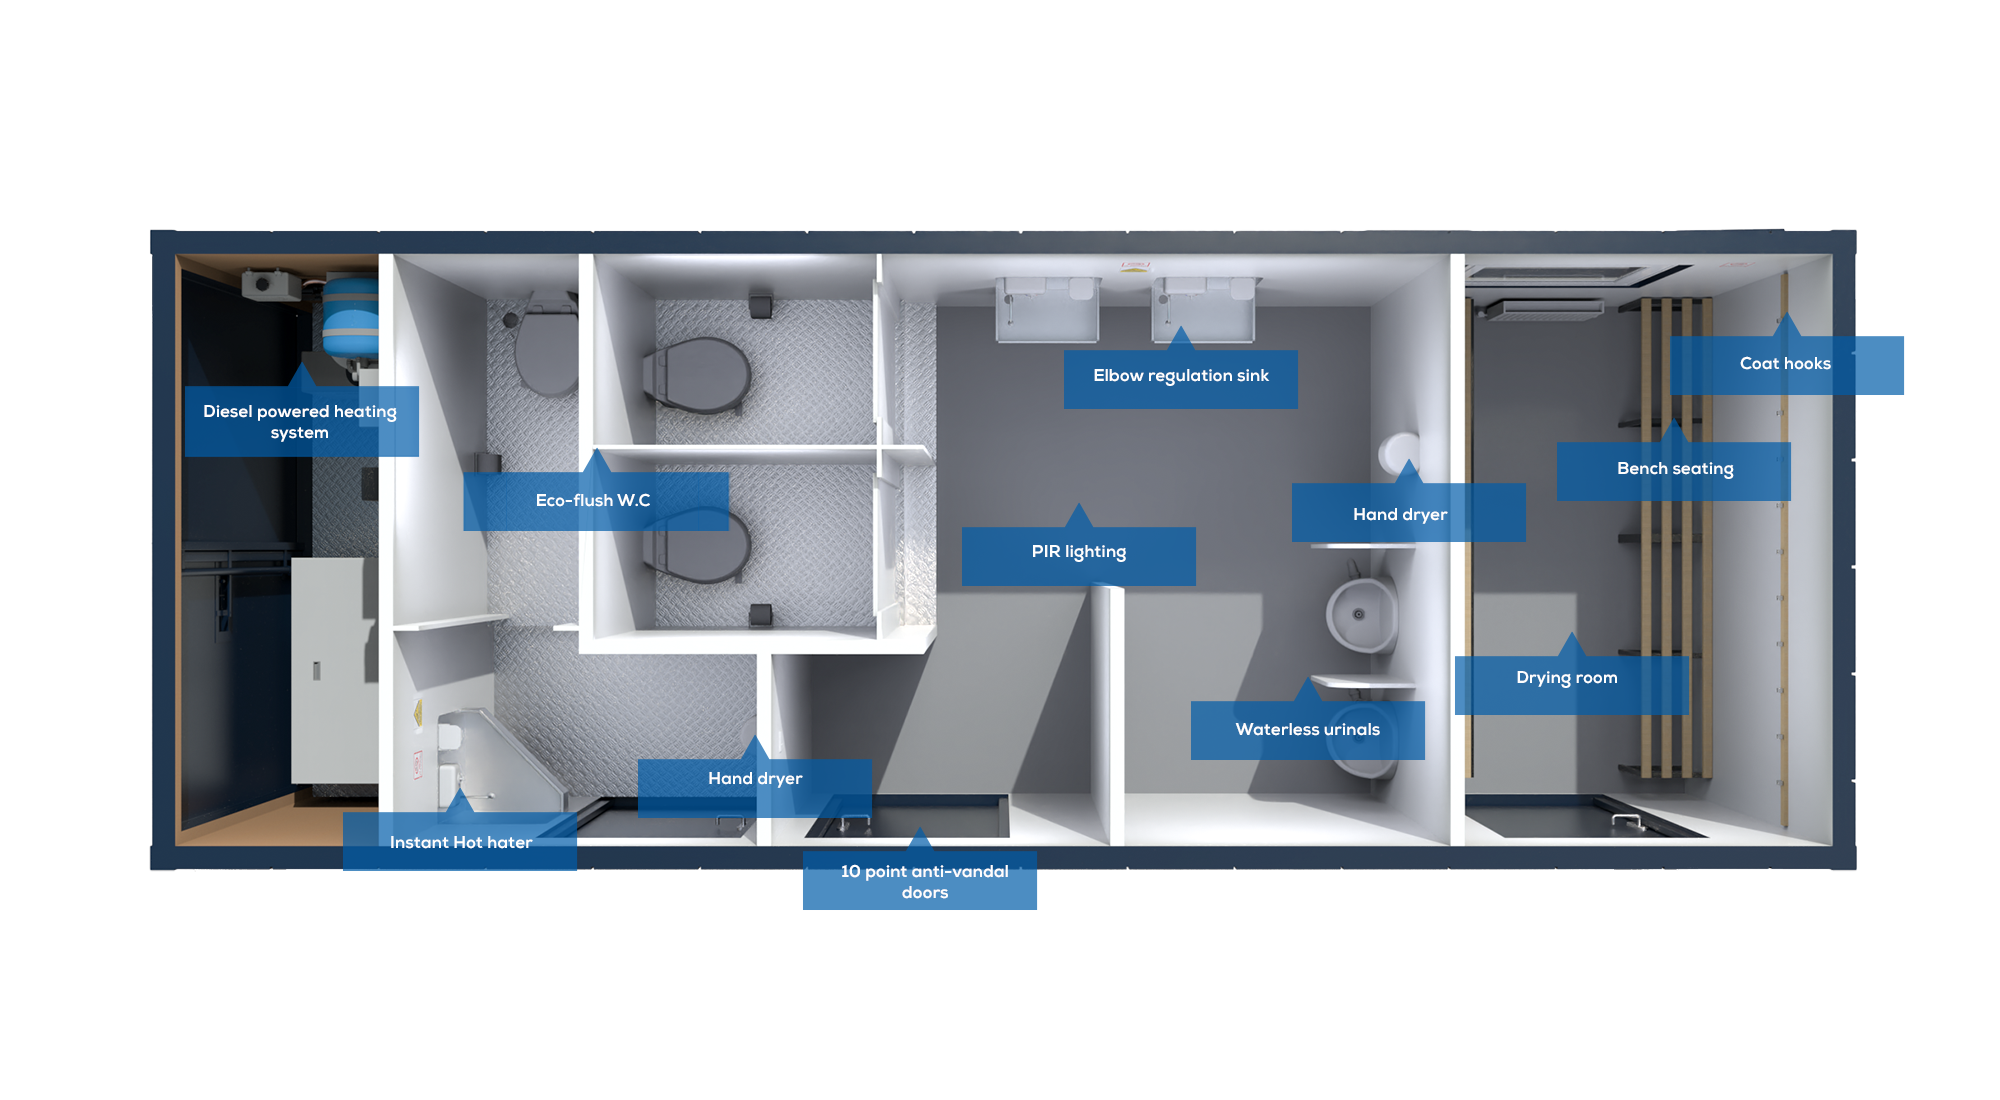 2+1+Dryer 24 Eco floorplan with tags